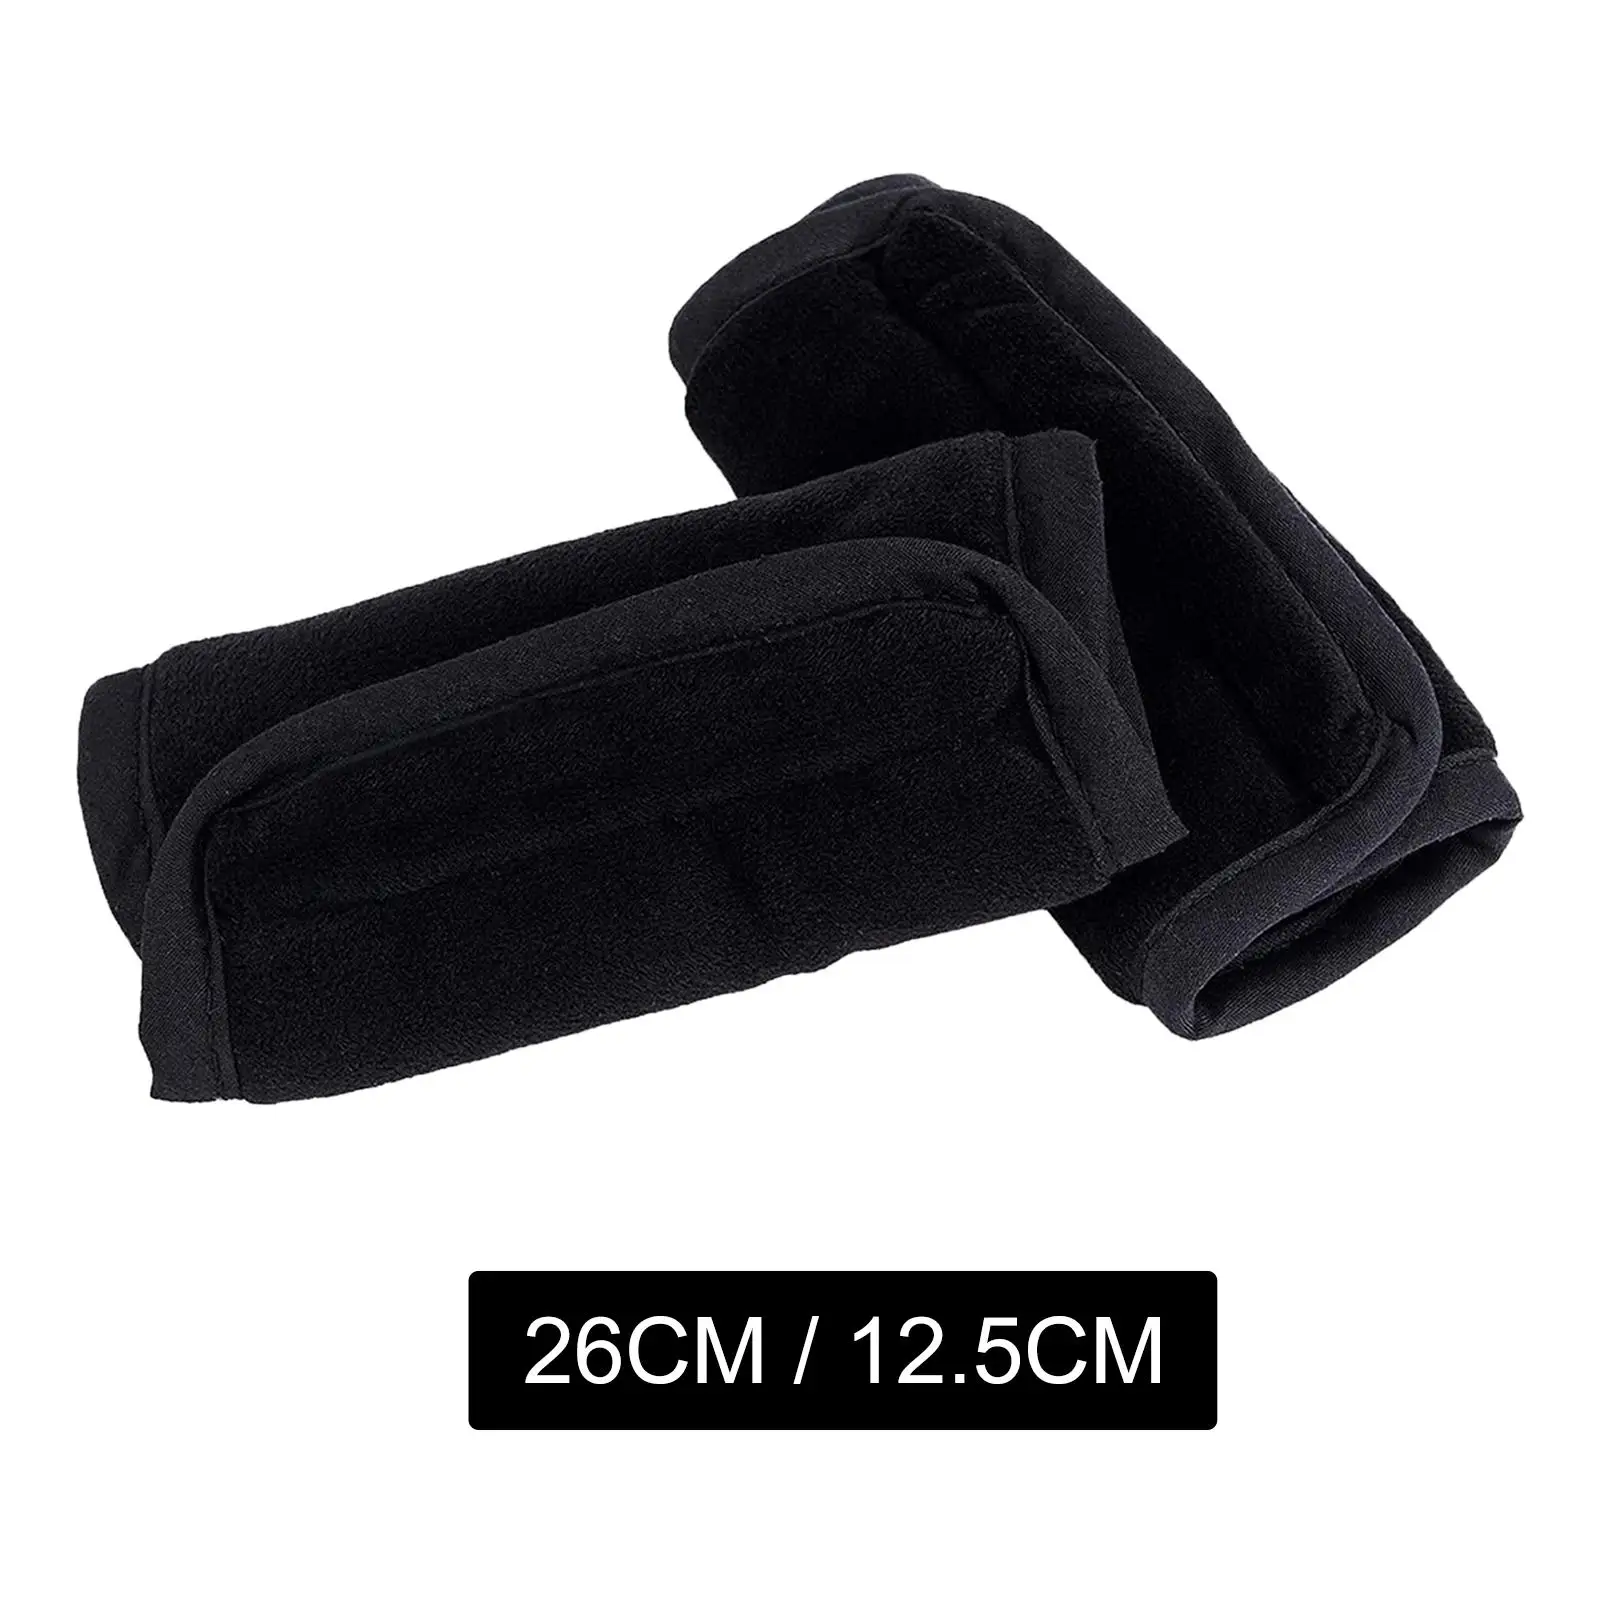 2 Pieces Car Seat Straps Covers Black Stroller Shoulder Covers for Stroller